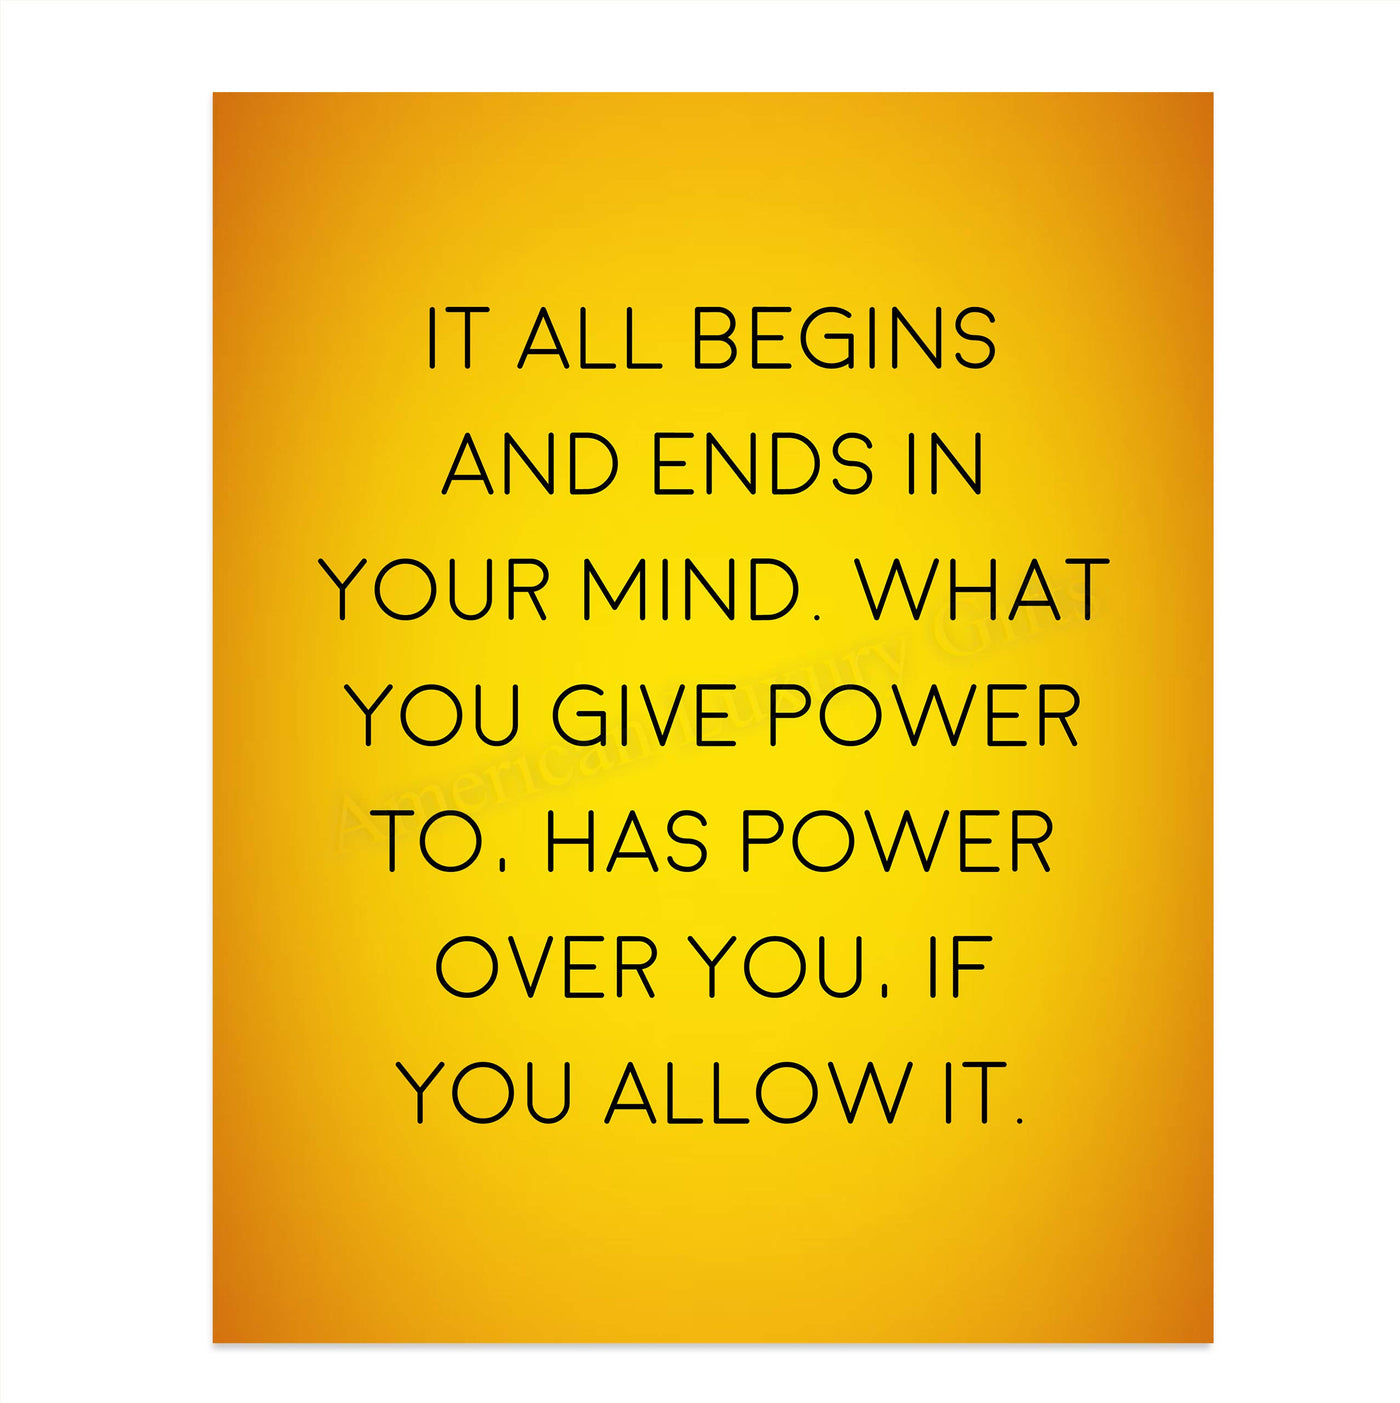 It All Begins & Ends In Your Mind Inspirational Quotes Wall Art -8 x 10" Modern Typographic Poster Print-Ready to Frame. Positive Home-Office-Studio-Classroom-Zen Decor! Great Gift of Motivation!